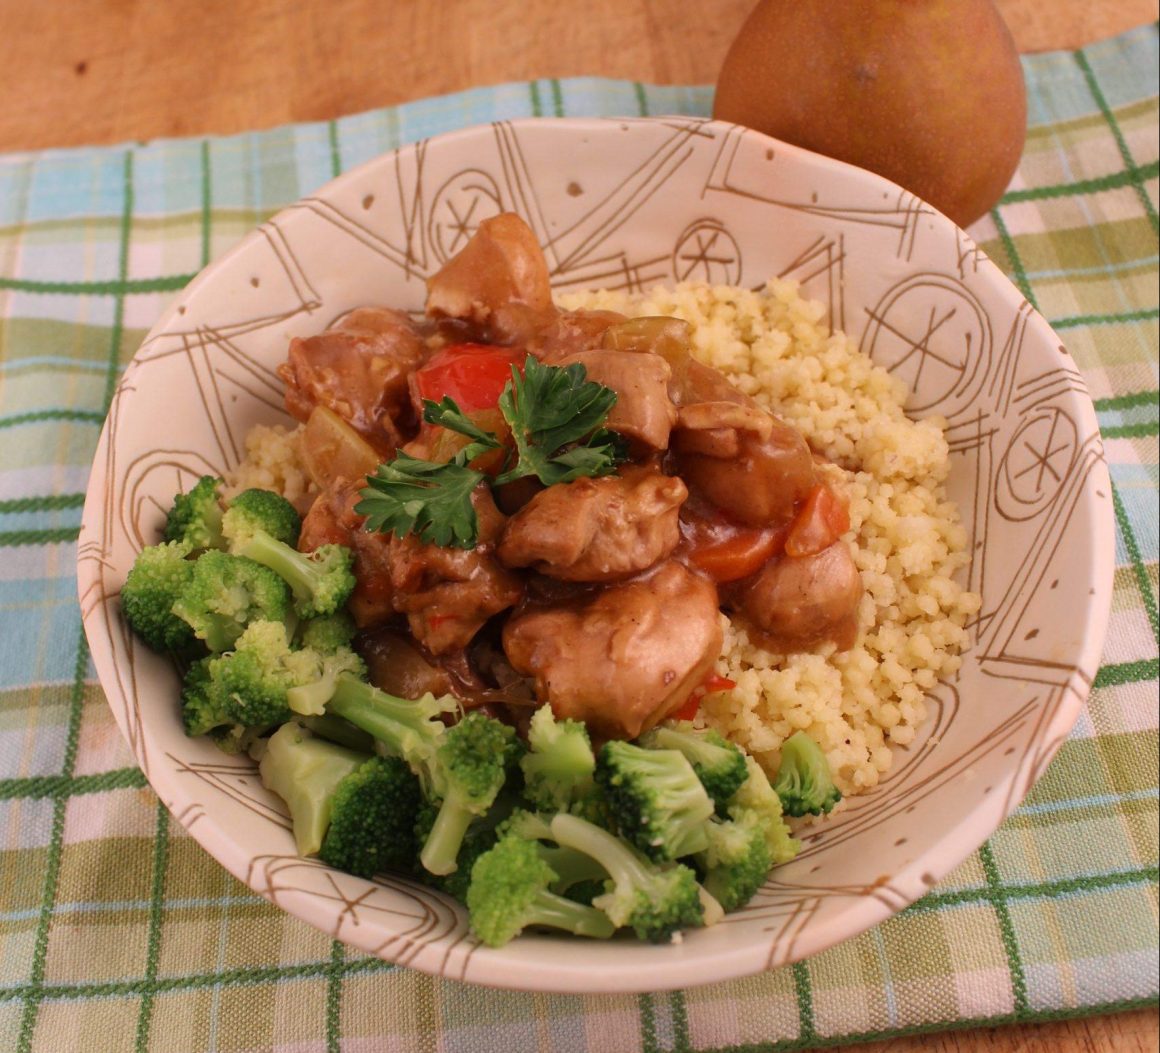 tong fu sweet and sour chicken dish served with rice and broccoli